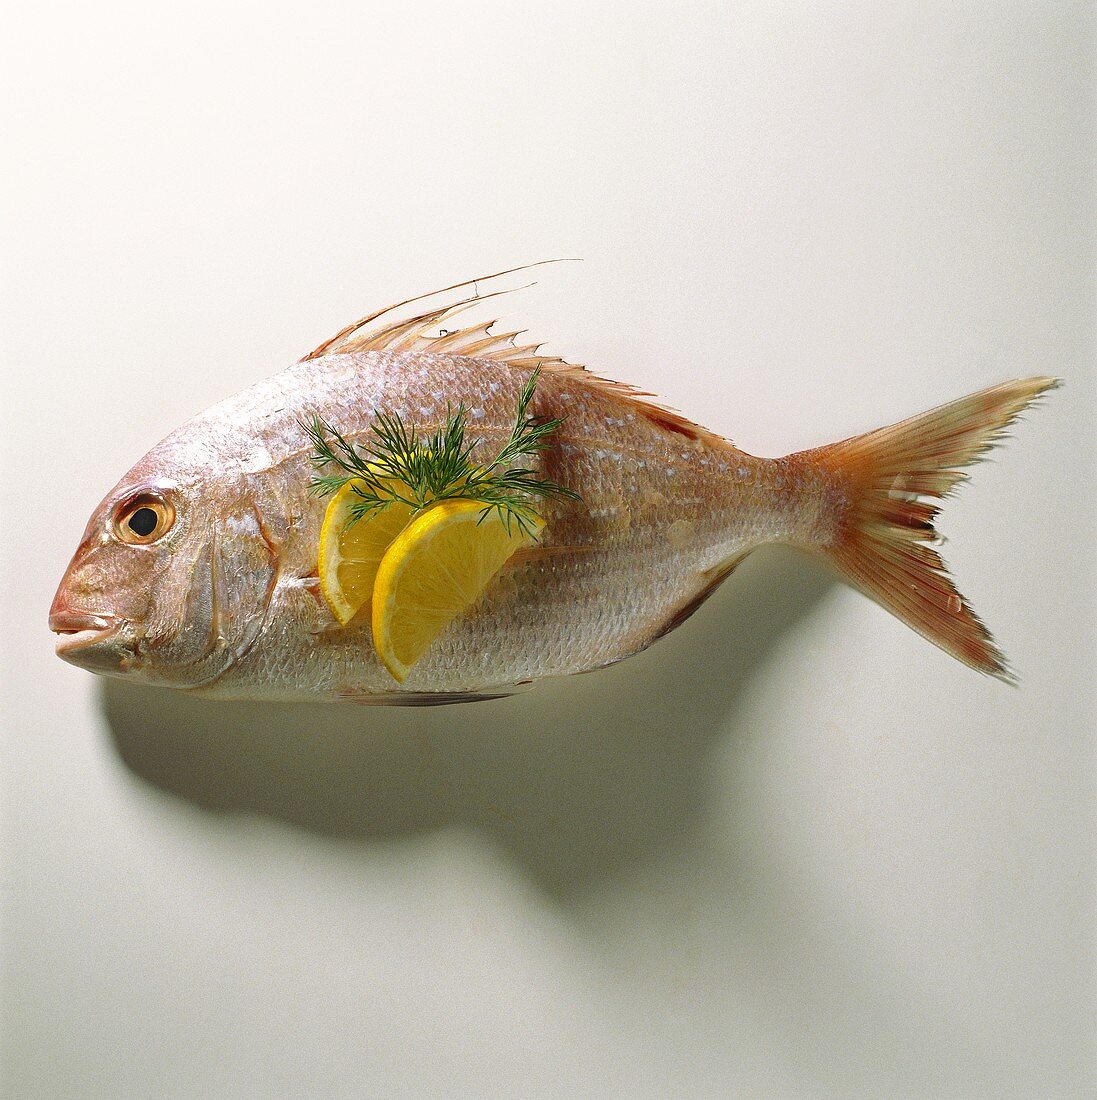 A fresh red sea bream with lemon slices